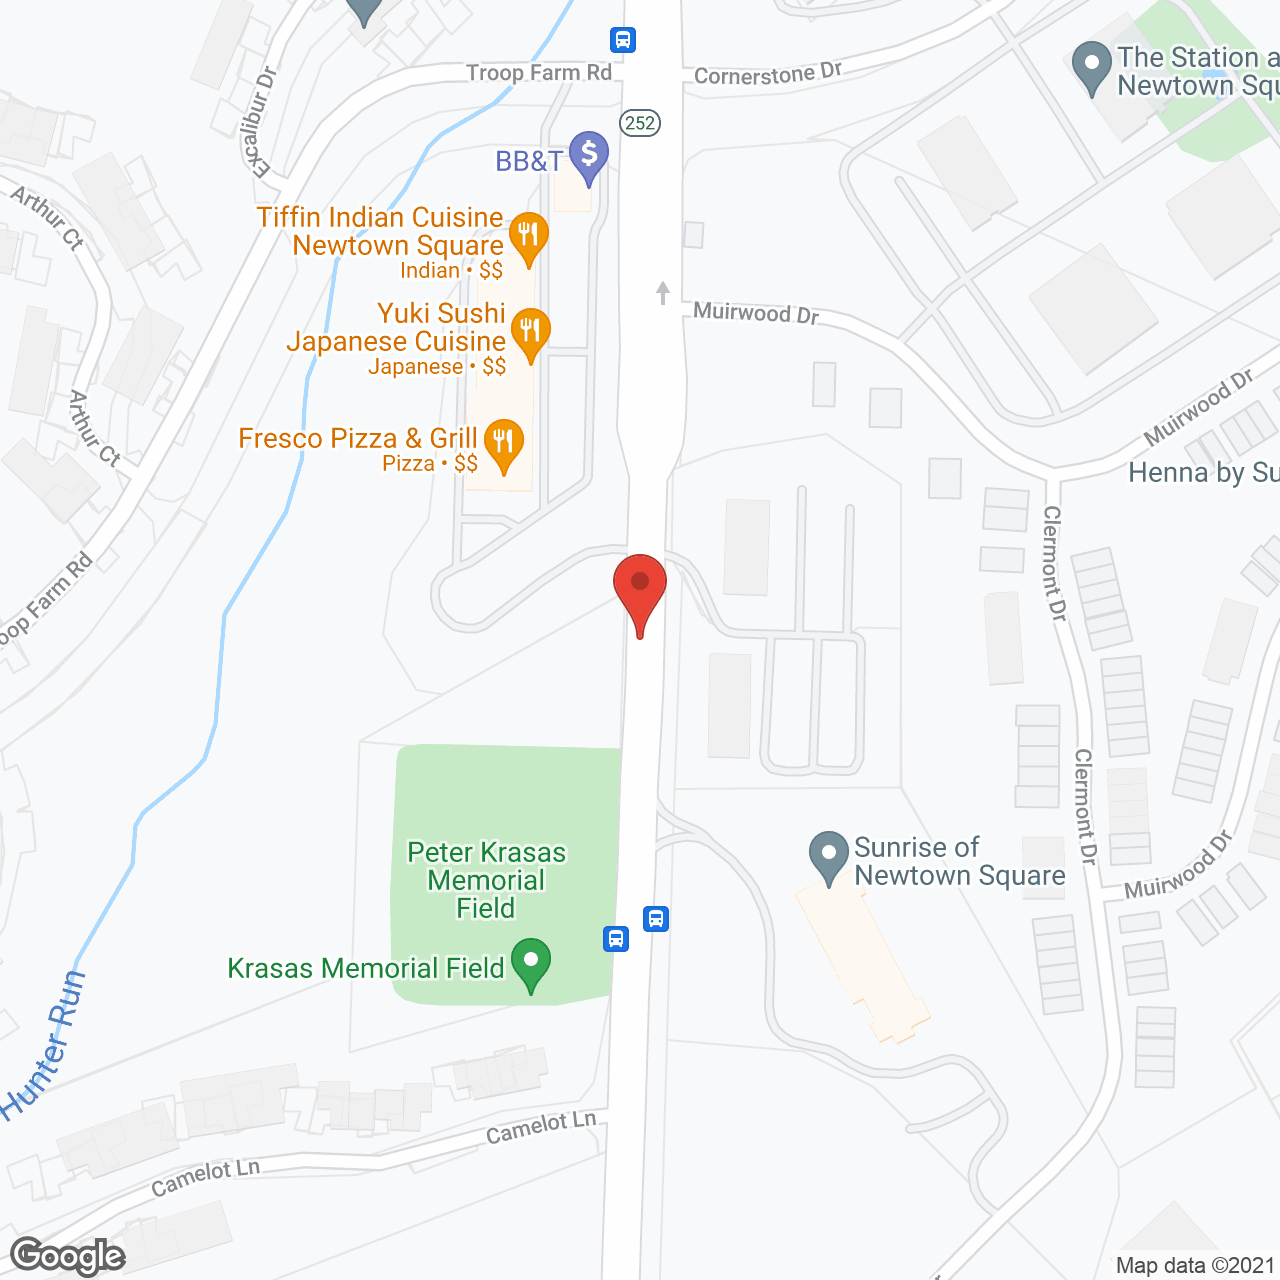 Sunrise of Newtown Square in google map